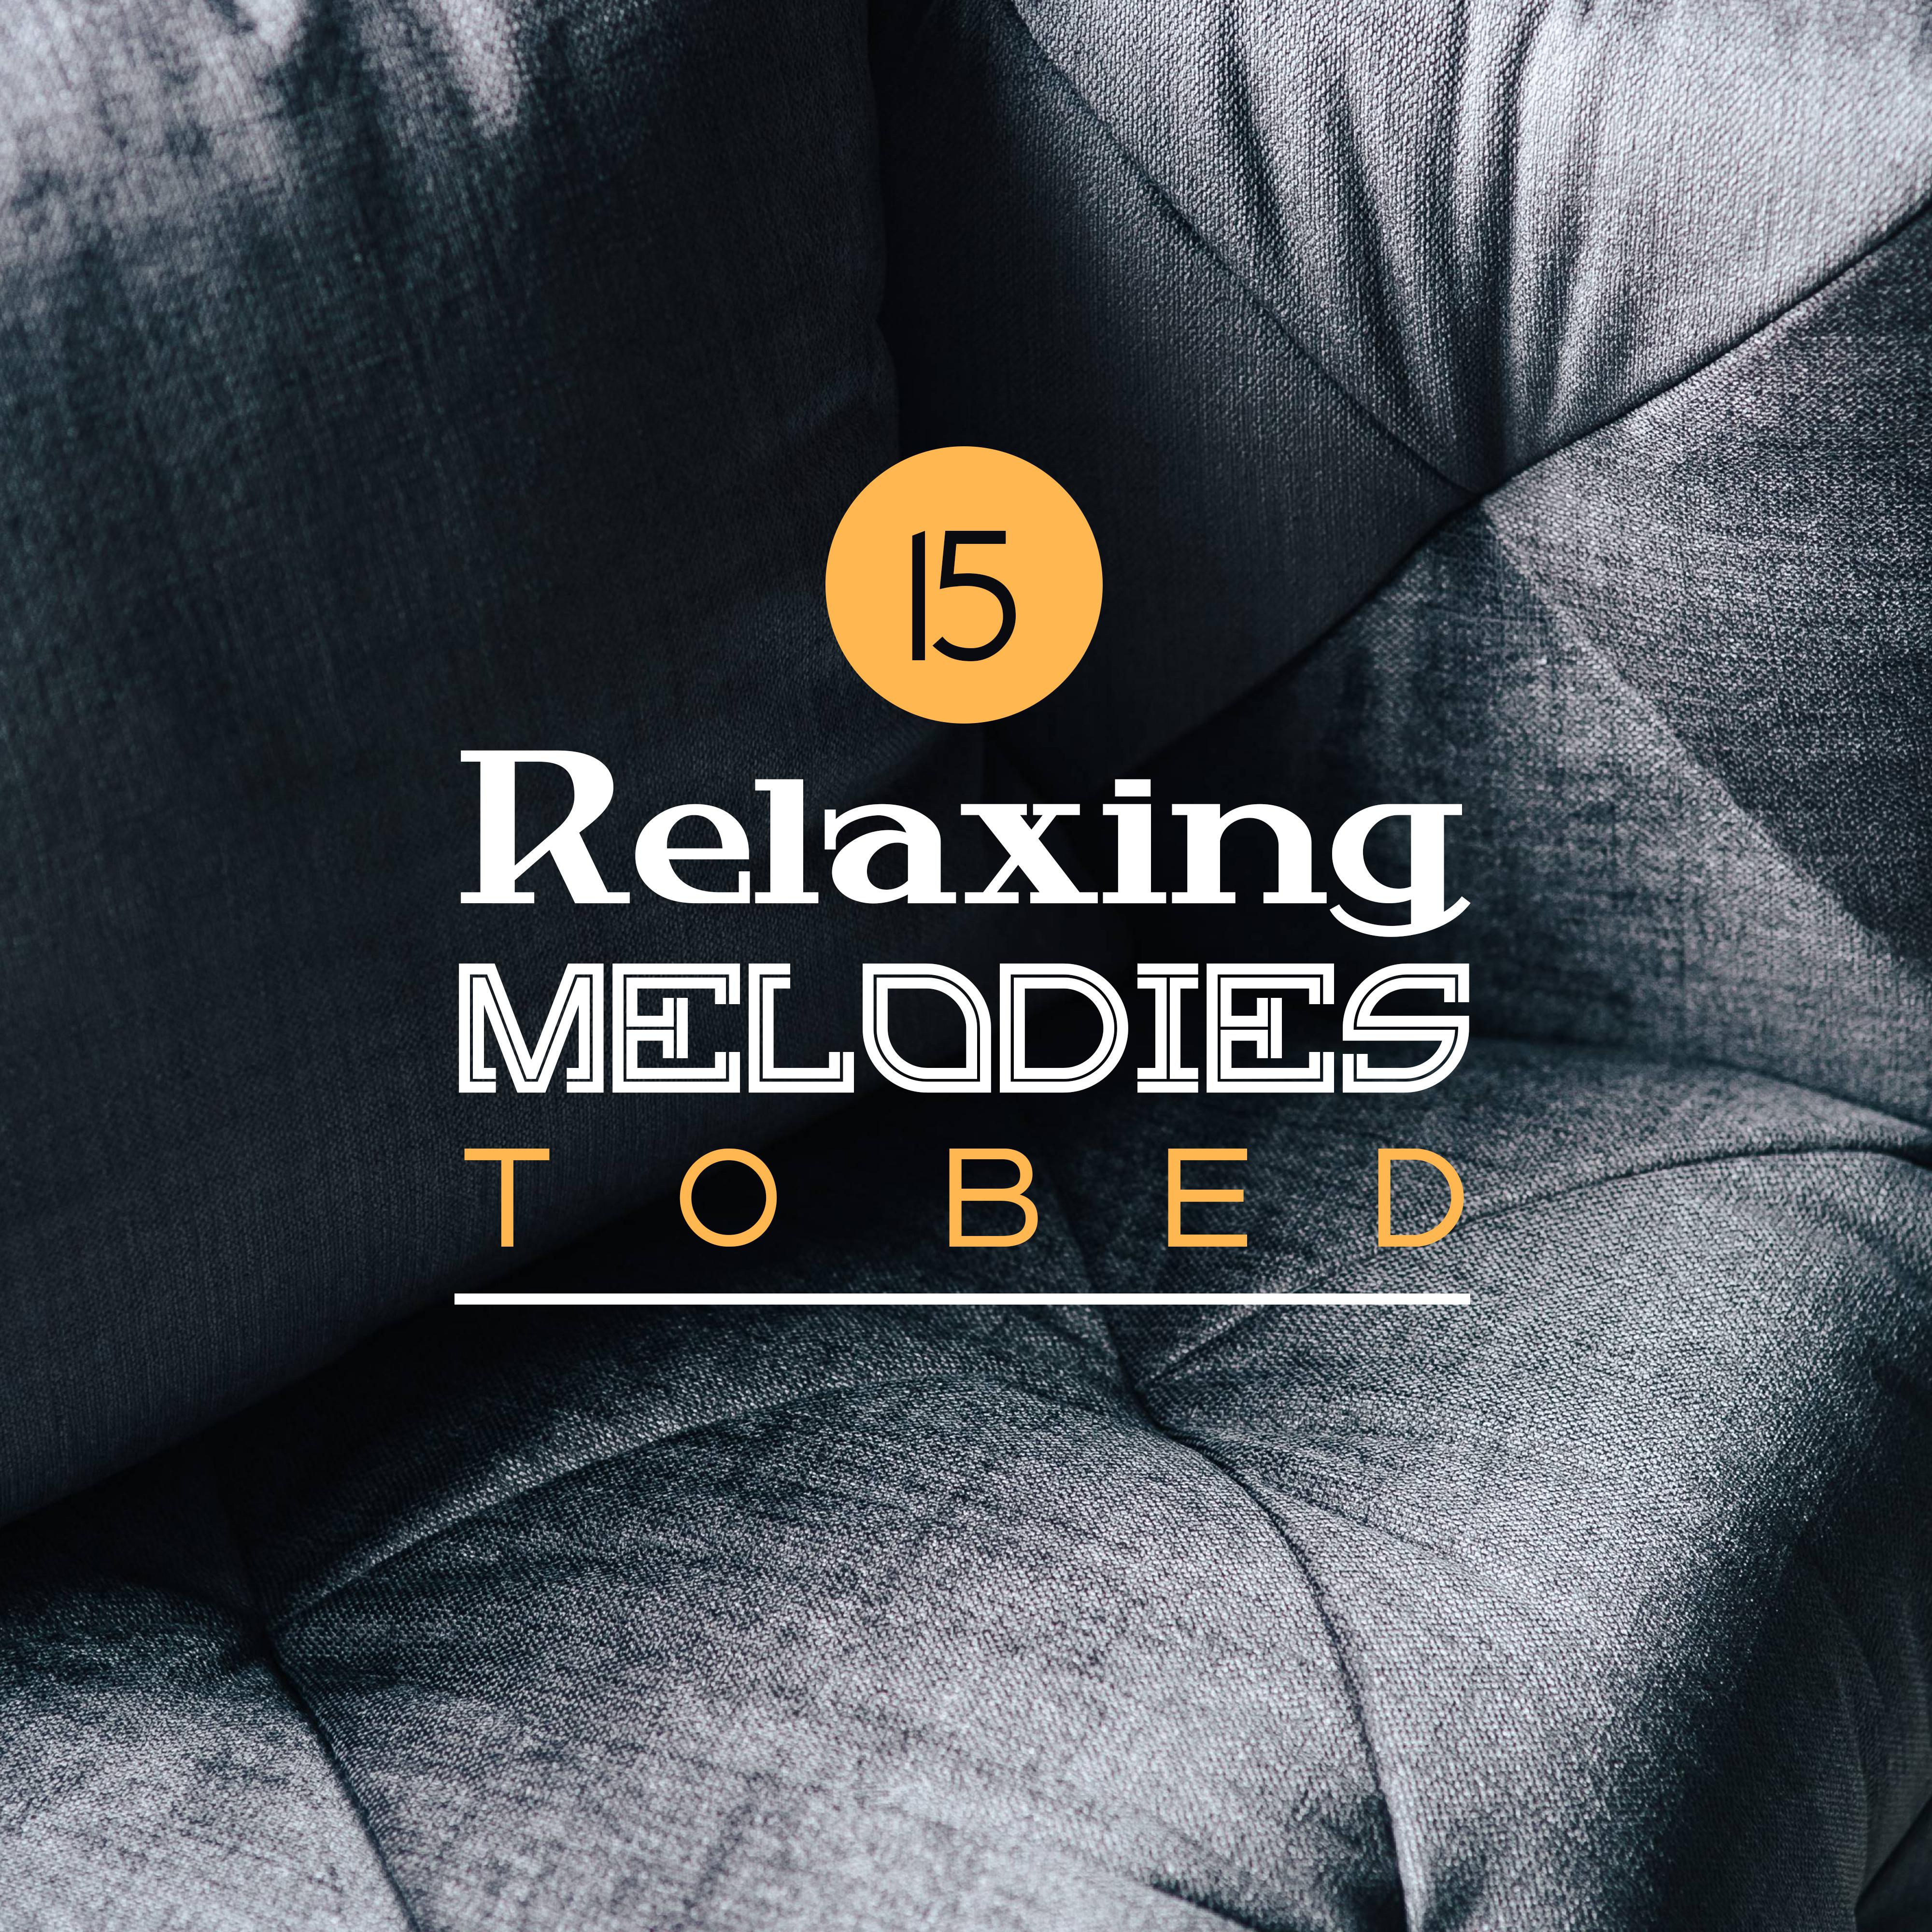 15 Relaxing Melodies to Bed  Restful Sleep, Ambient Music, Calm Down, Sweet Dreams, Lullaby